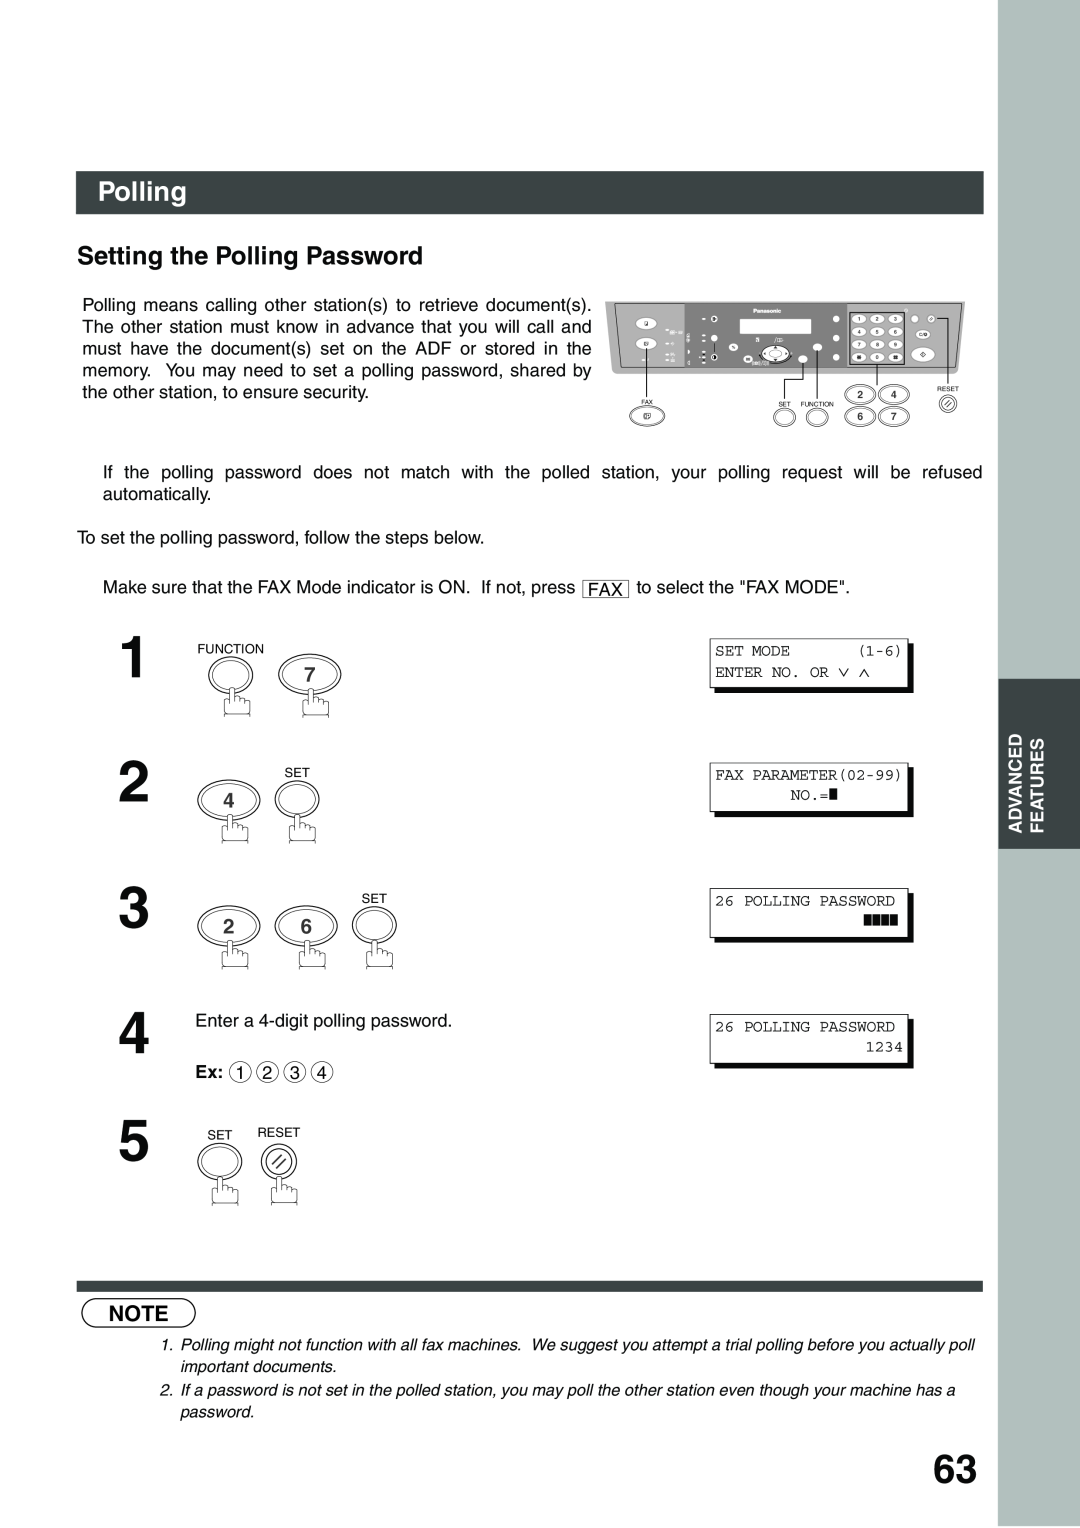 Panasonic DP-135FP appendix Setting the Polling Password, The other station must know in advance that you will call and 